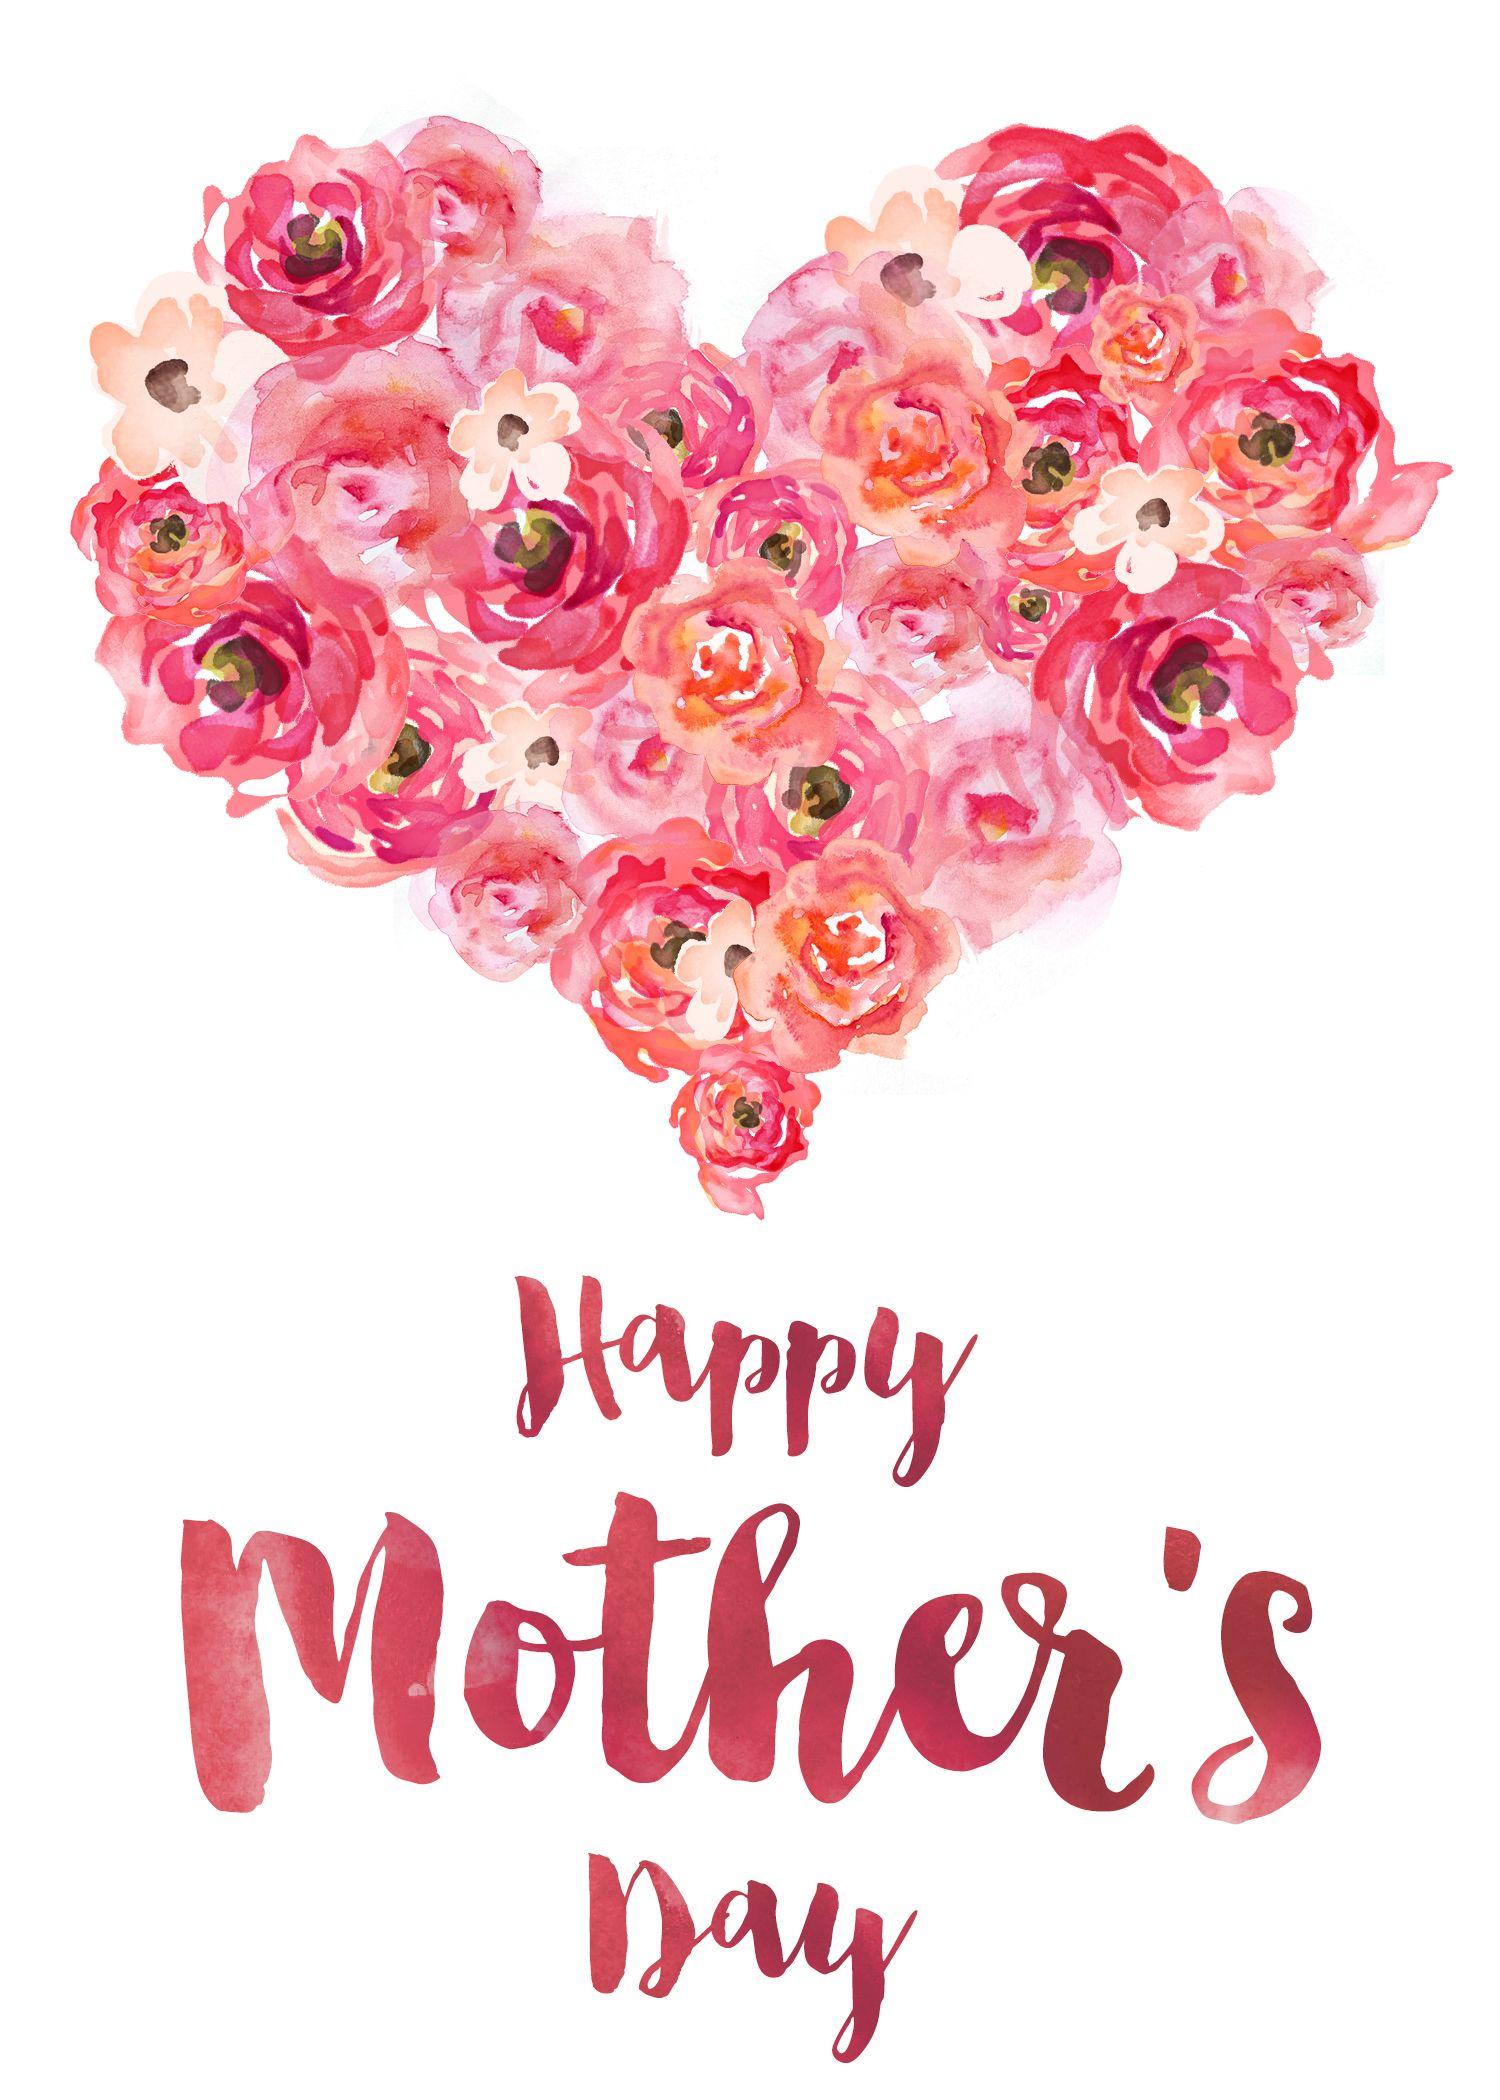 Customized Banner. Mothers day cards, Mother day message, Happy